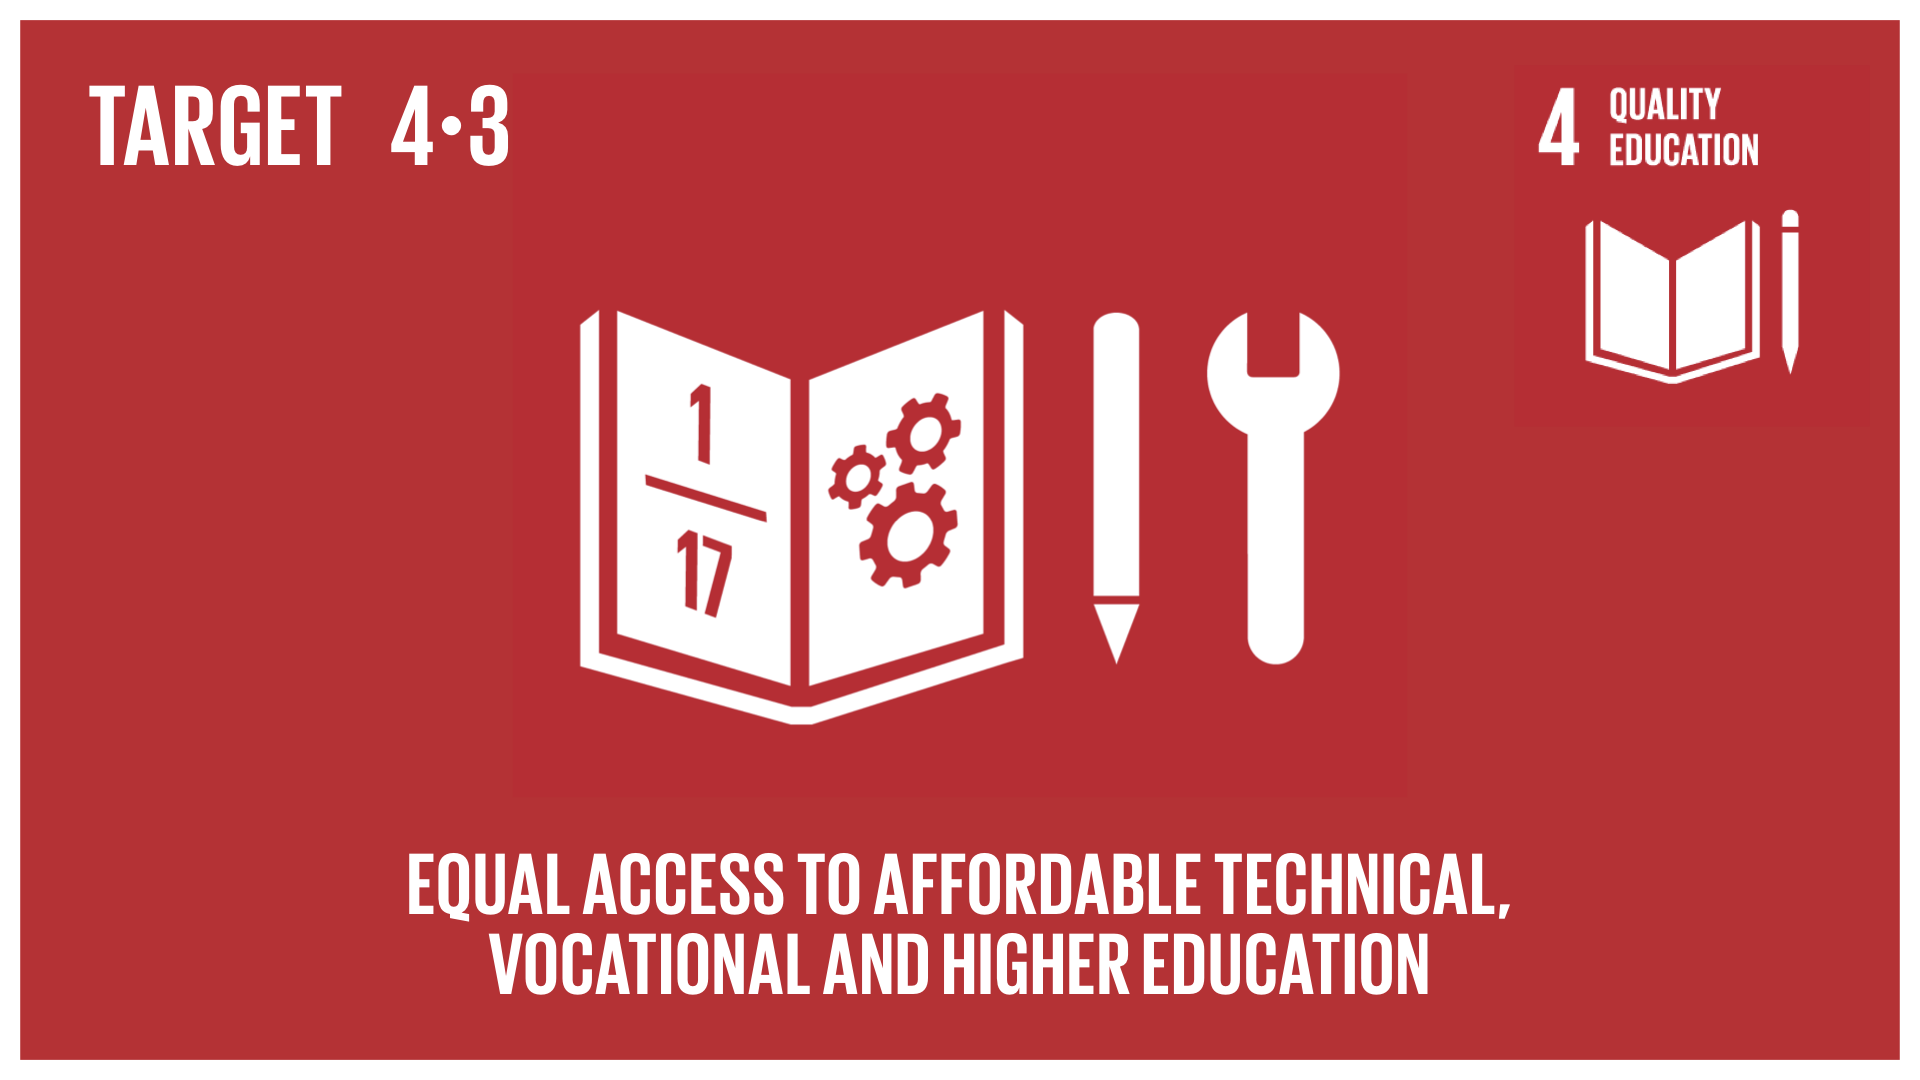 Graphic displaying equal access to affordable technical, vocational and higher education for all 